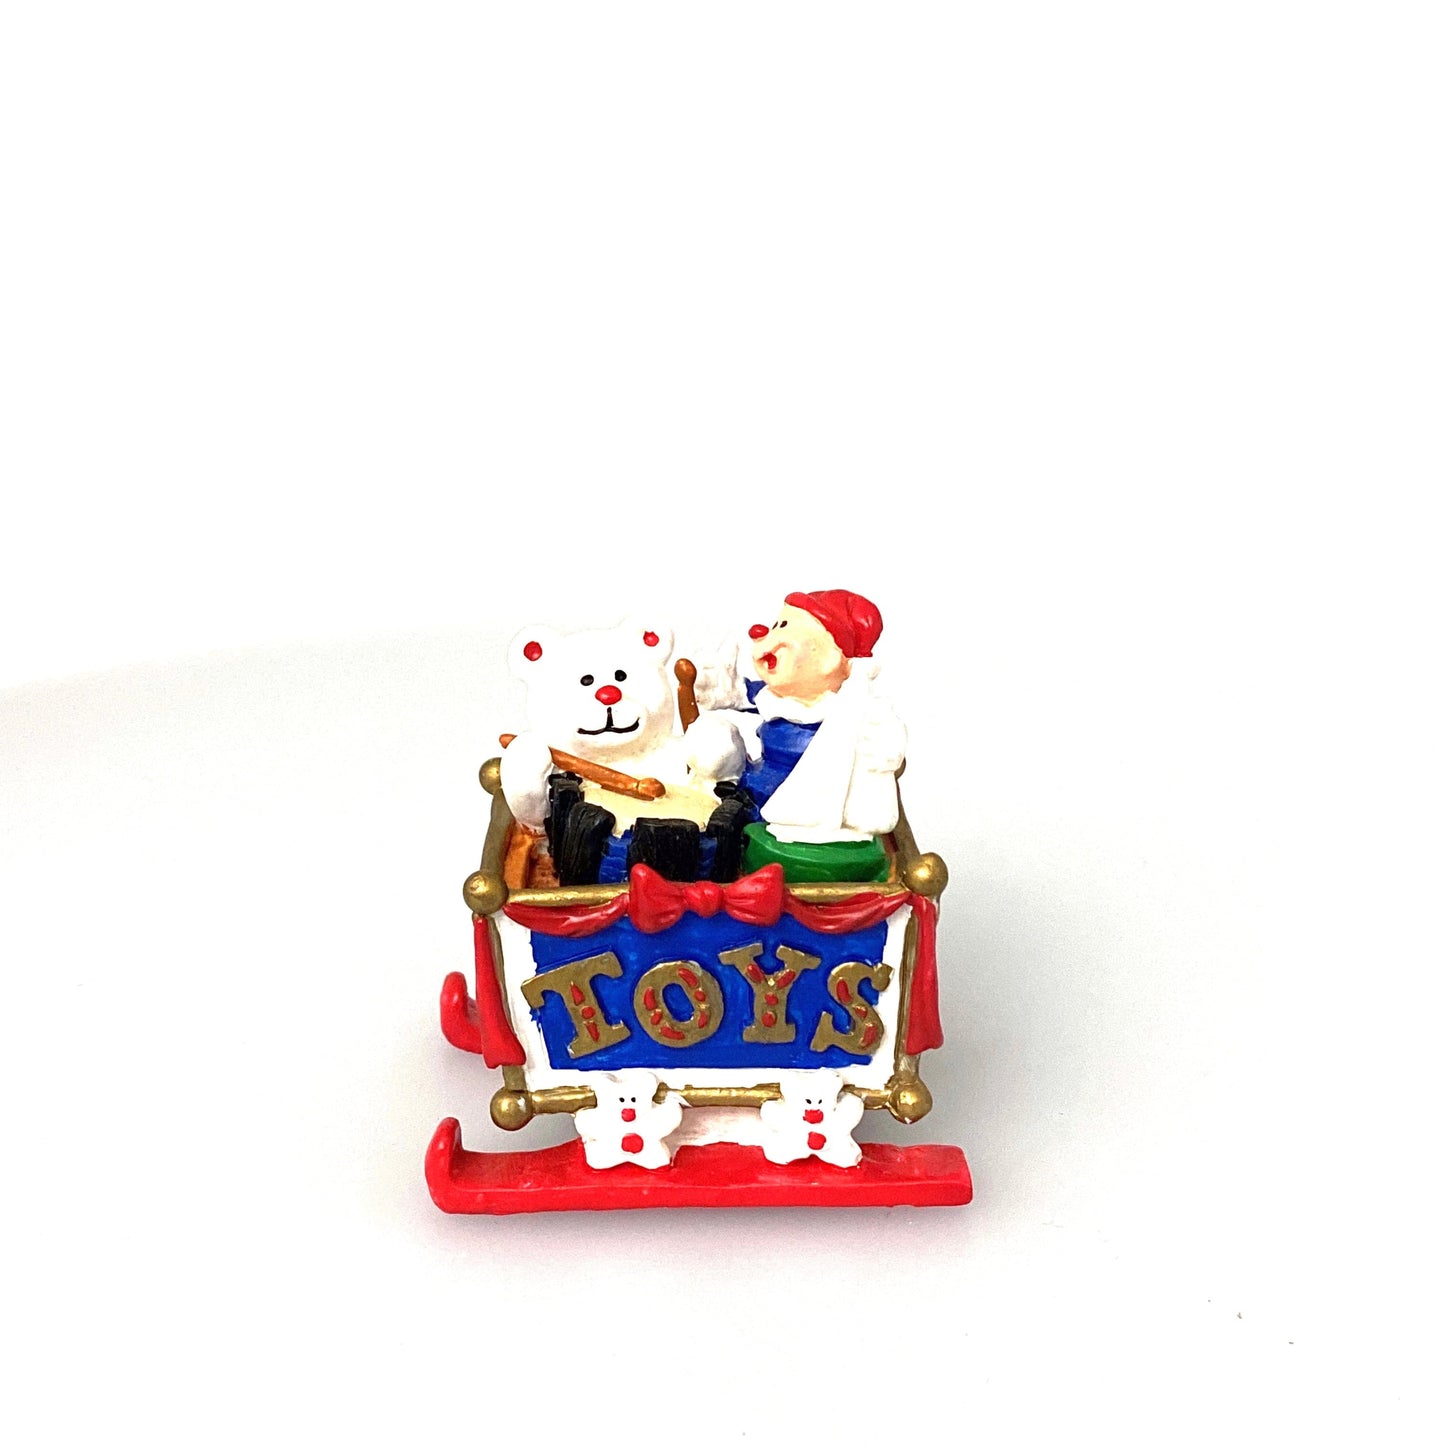 Vintage 1996 North Pole Ltd. “TOYS” Sled Christmas Holiday Table-Top Decoration